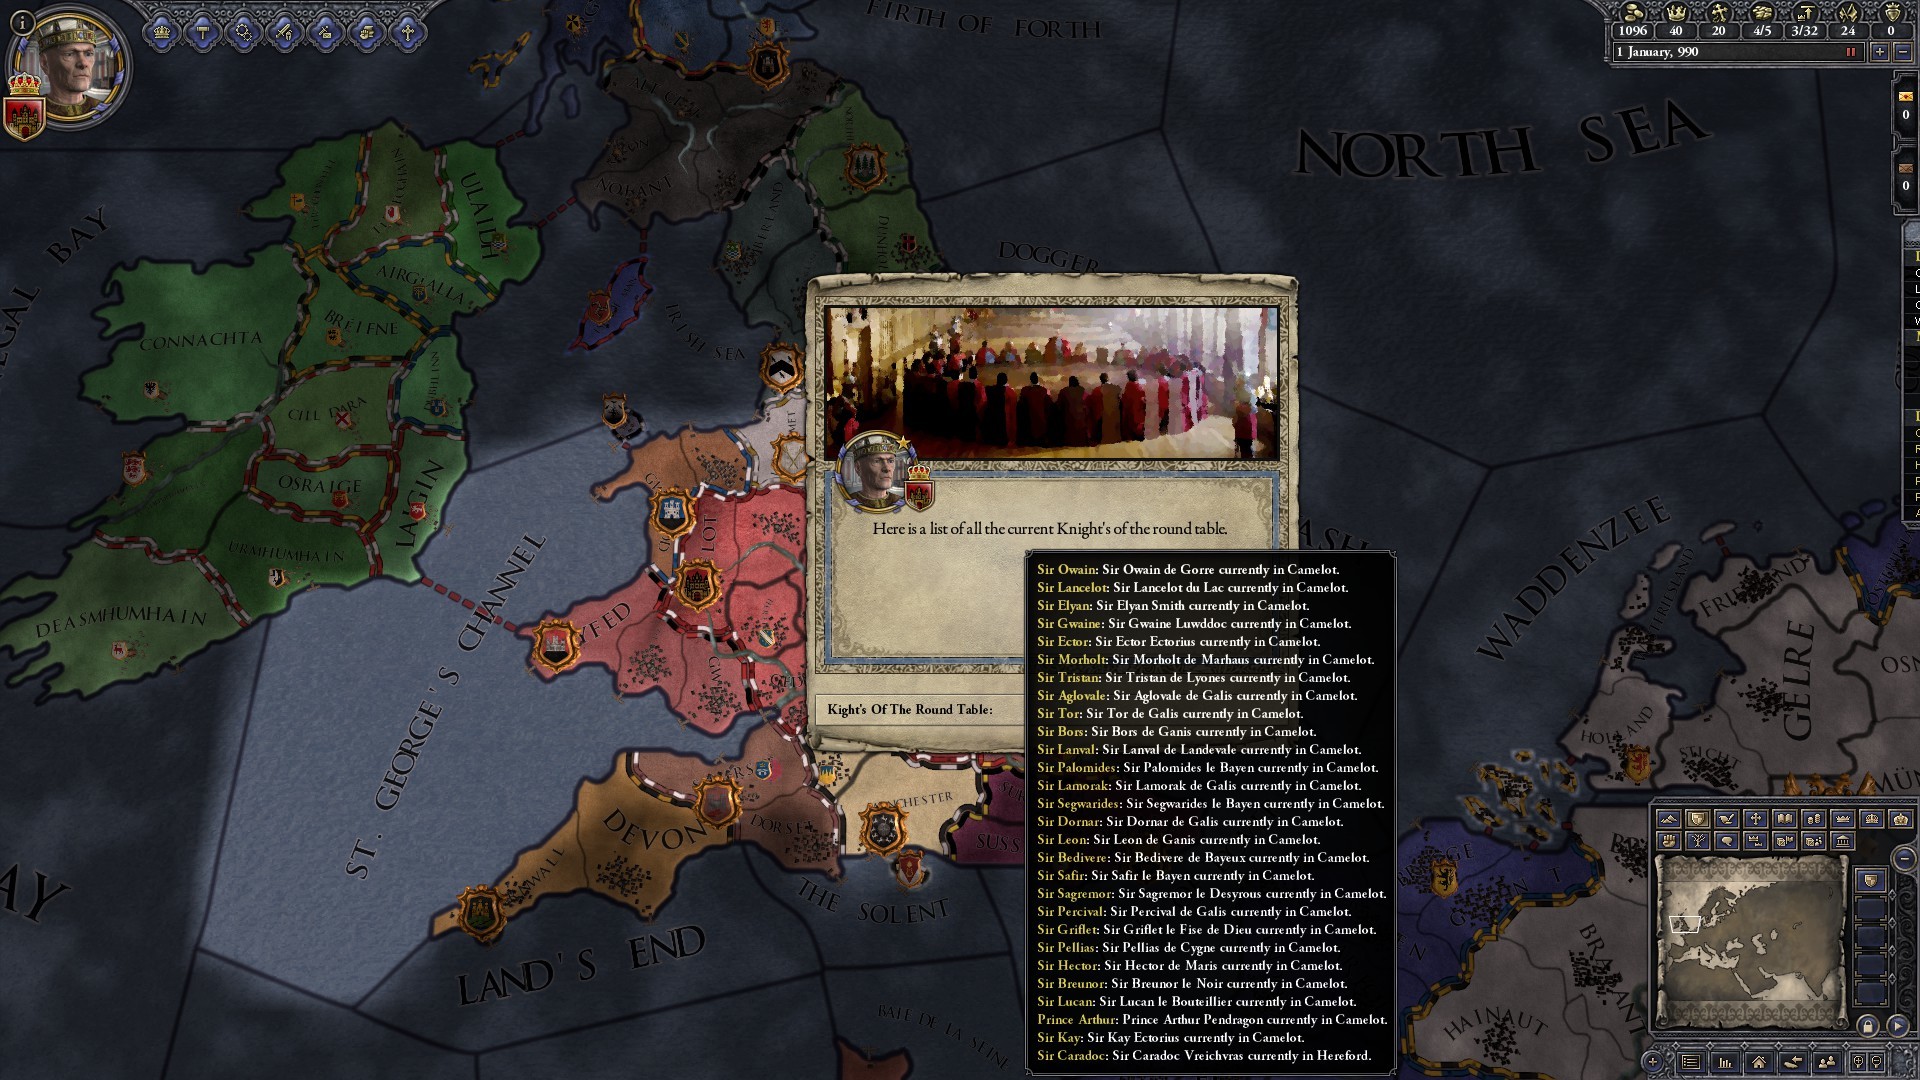 The Knights of the Round Table image – Crusader Kings 2: Wizarding World  mod for Crusader Kings II